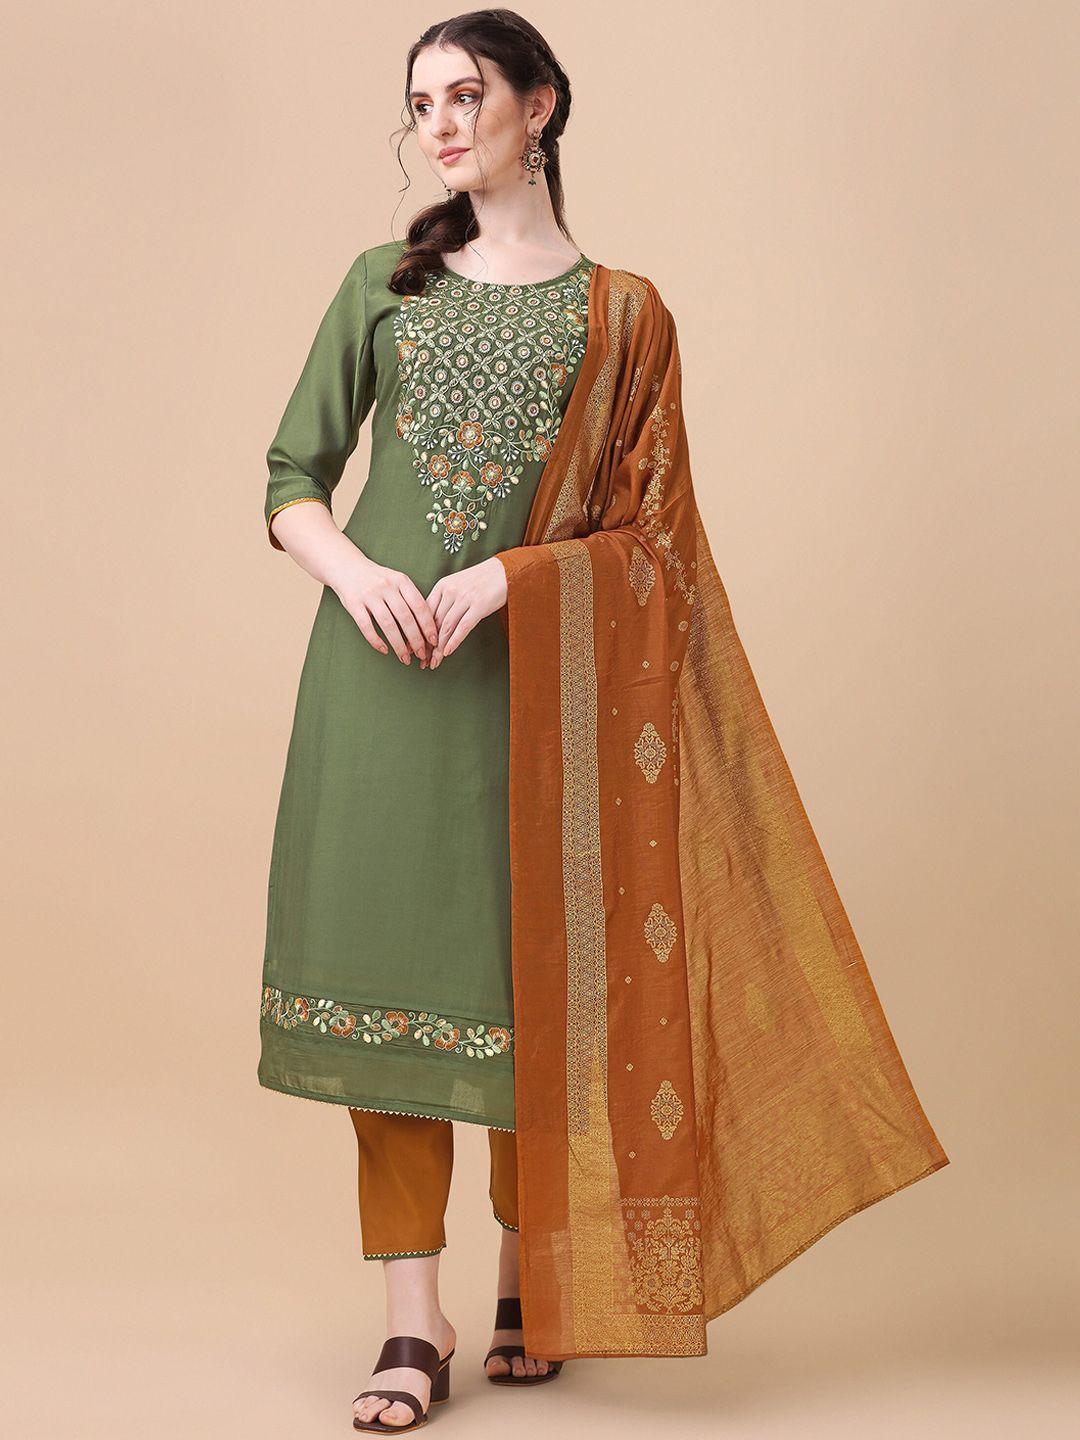 berrylicious green floral embroidered thread work chanderi cotton kurta with trousers & dupatta